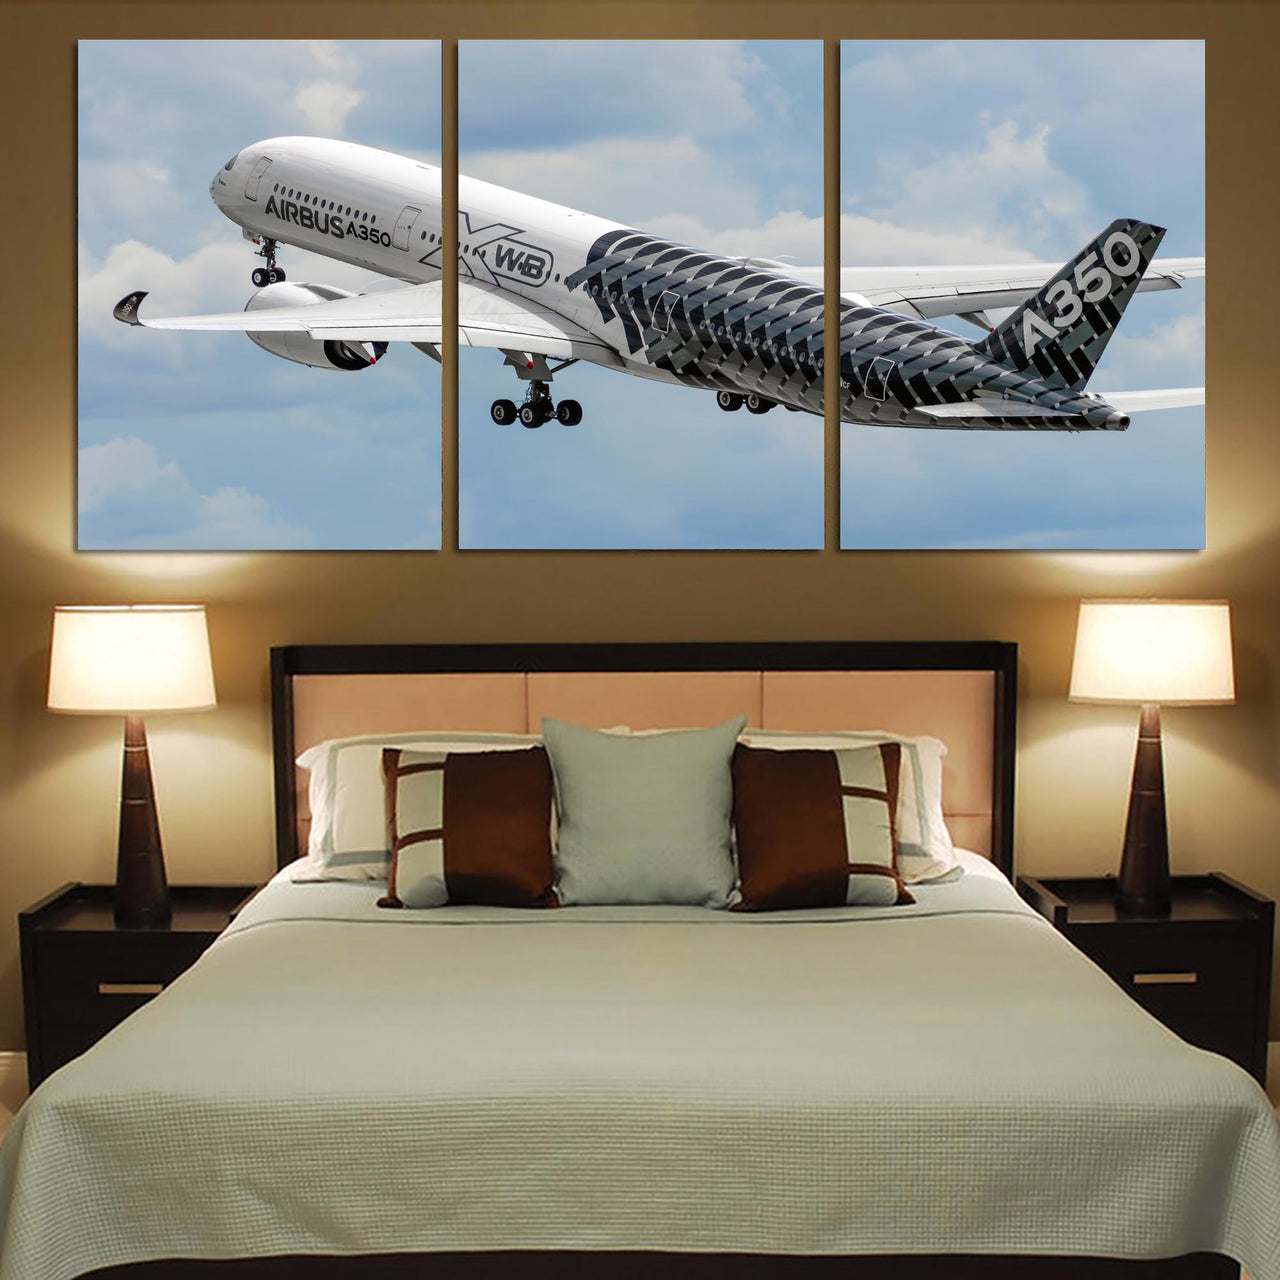 Departing Airbus A350 (Original Livery) Printed Canvas Posters (3 Pieces)